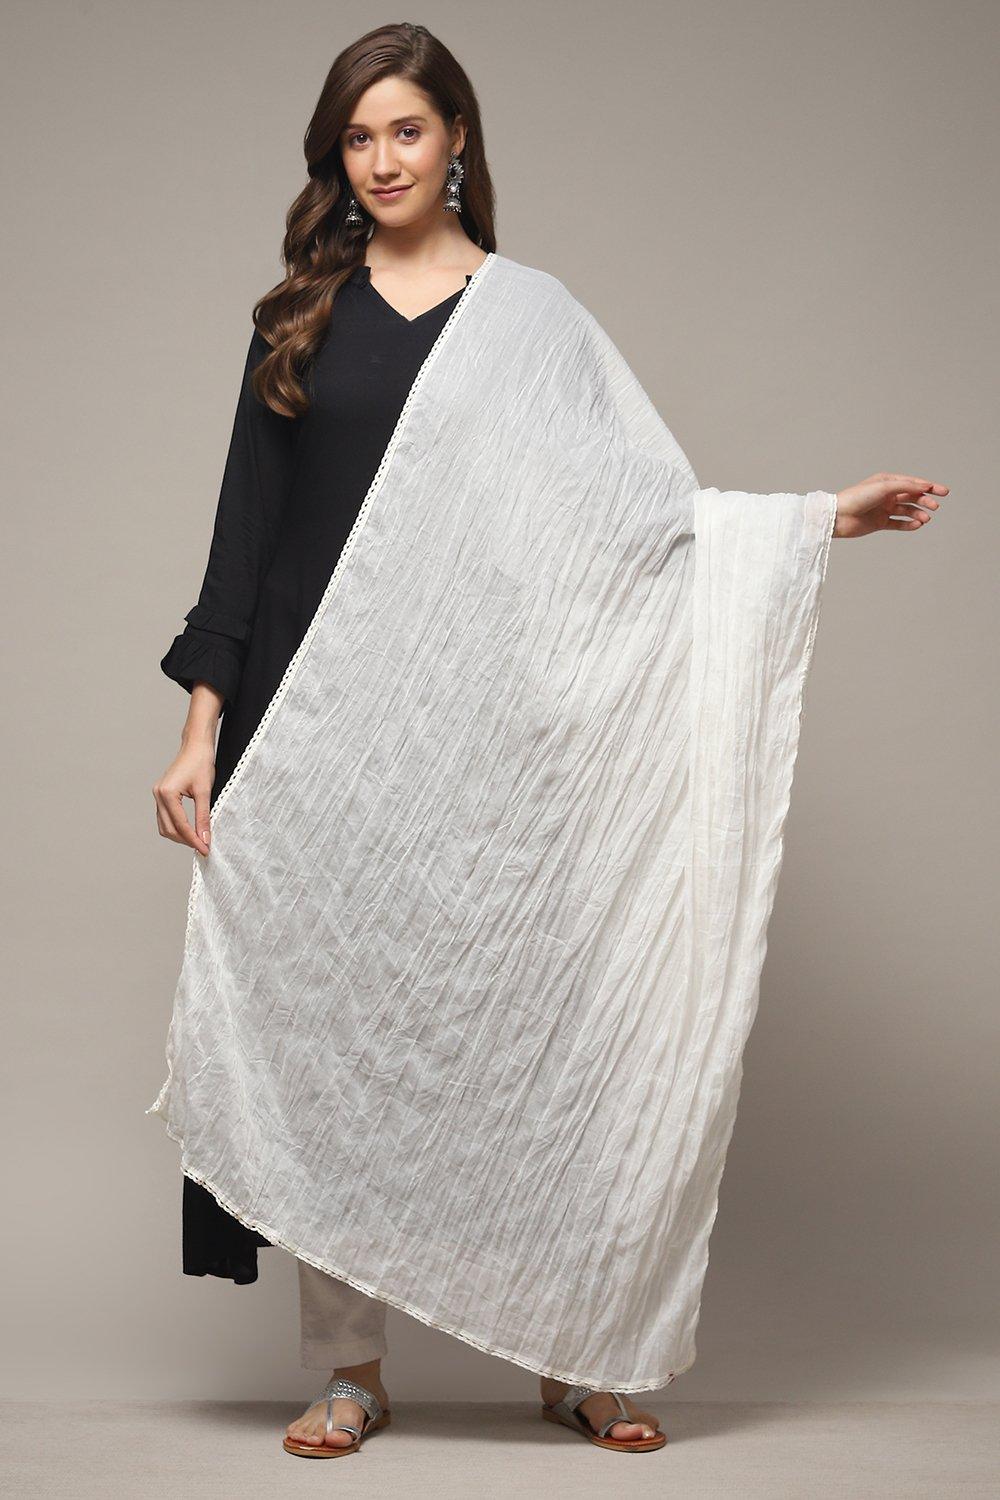 Buy online White Cotton Dupatta for womens and girls at best price ...